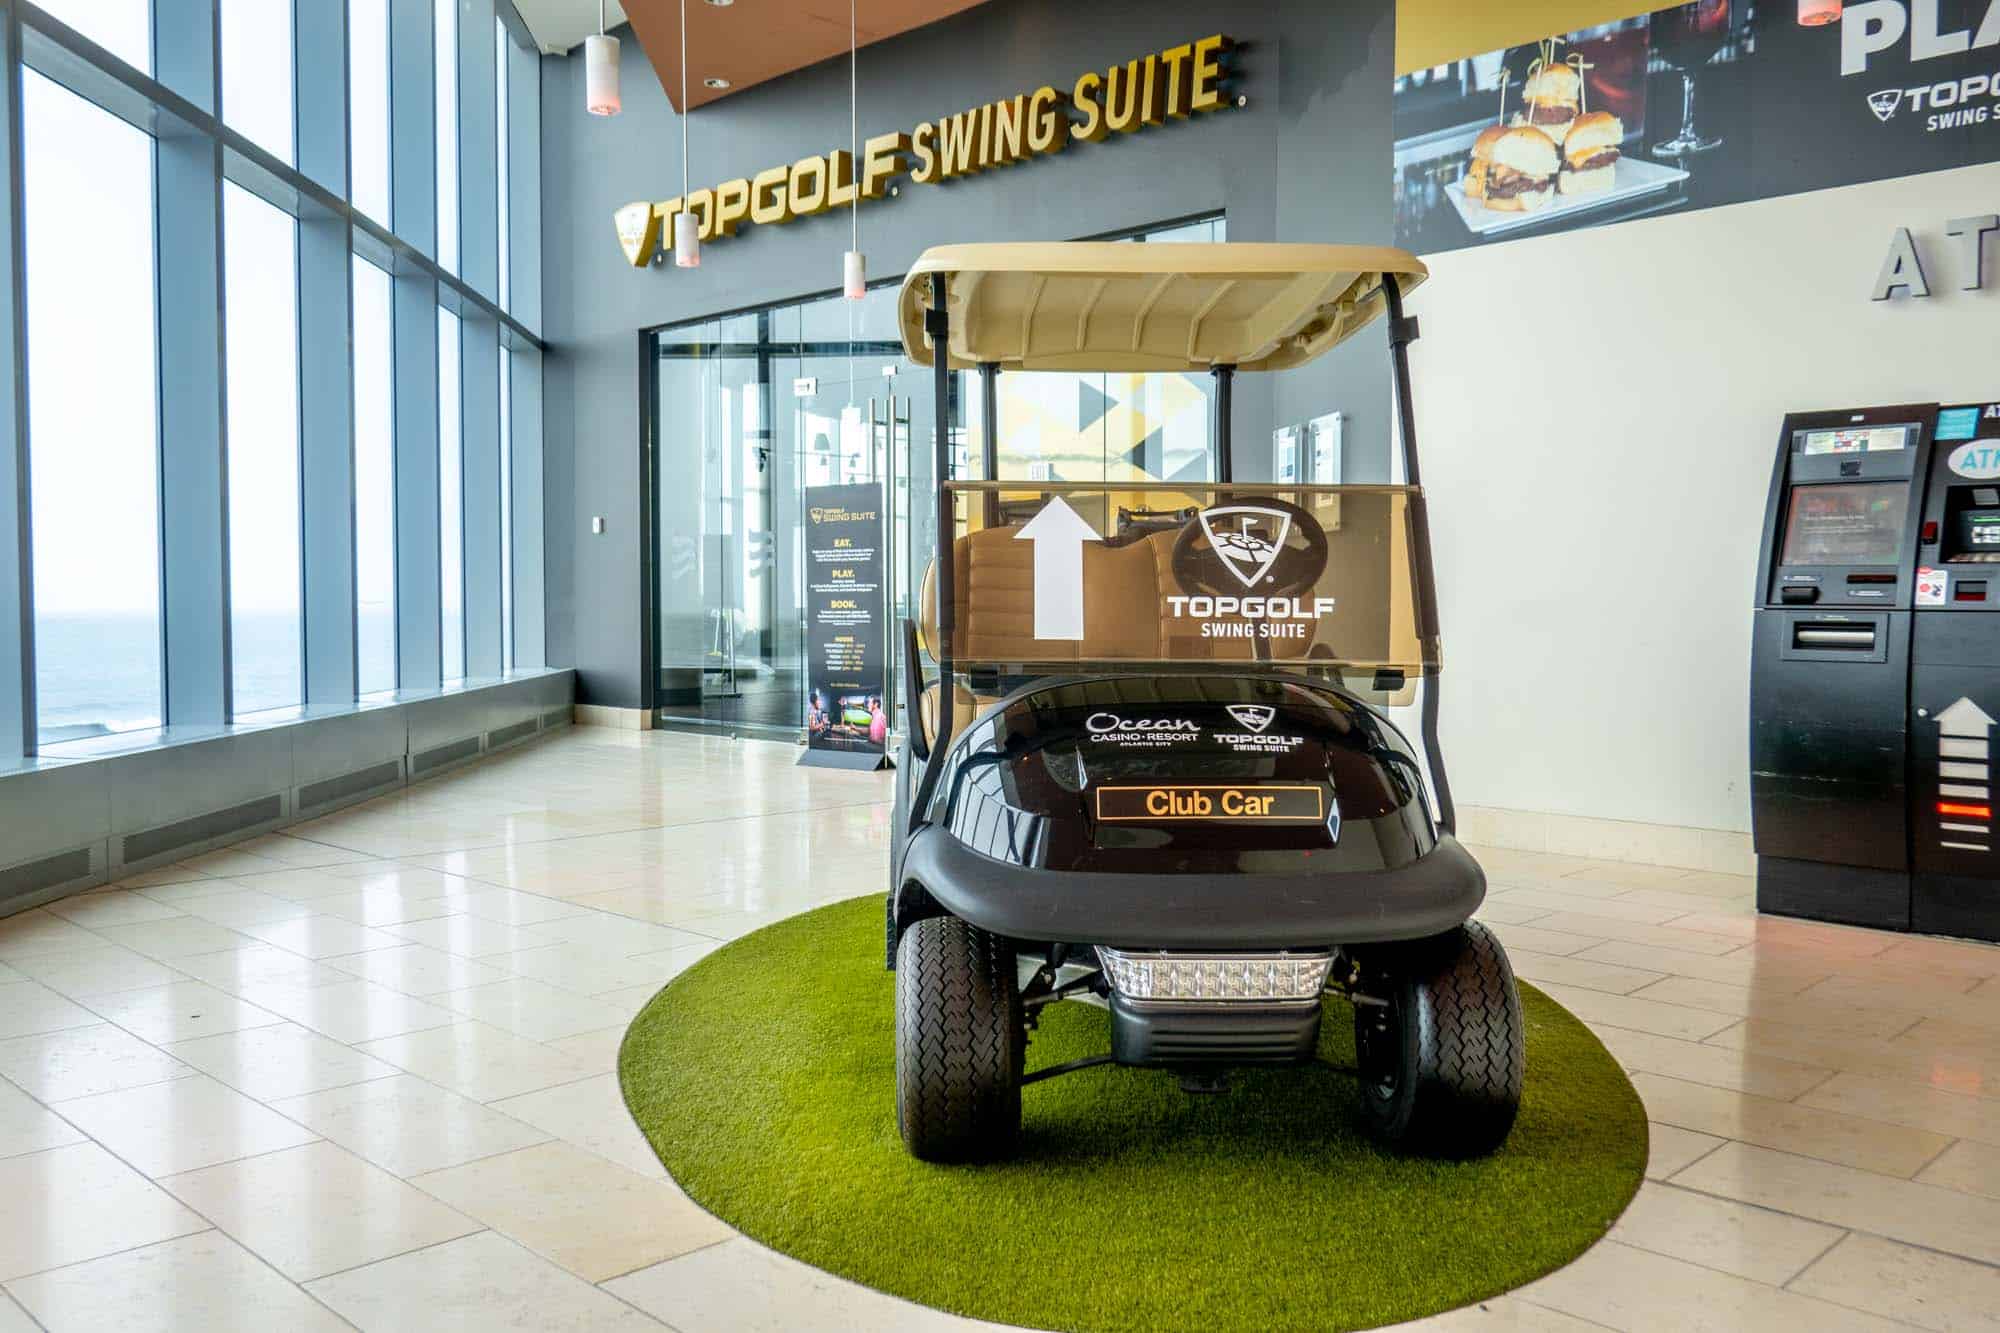 Golf cart indoors, outside of a business with a sign for "Topgolf Swing Suite"